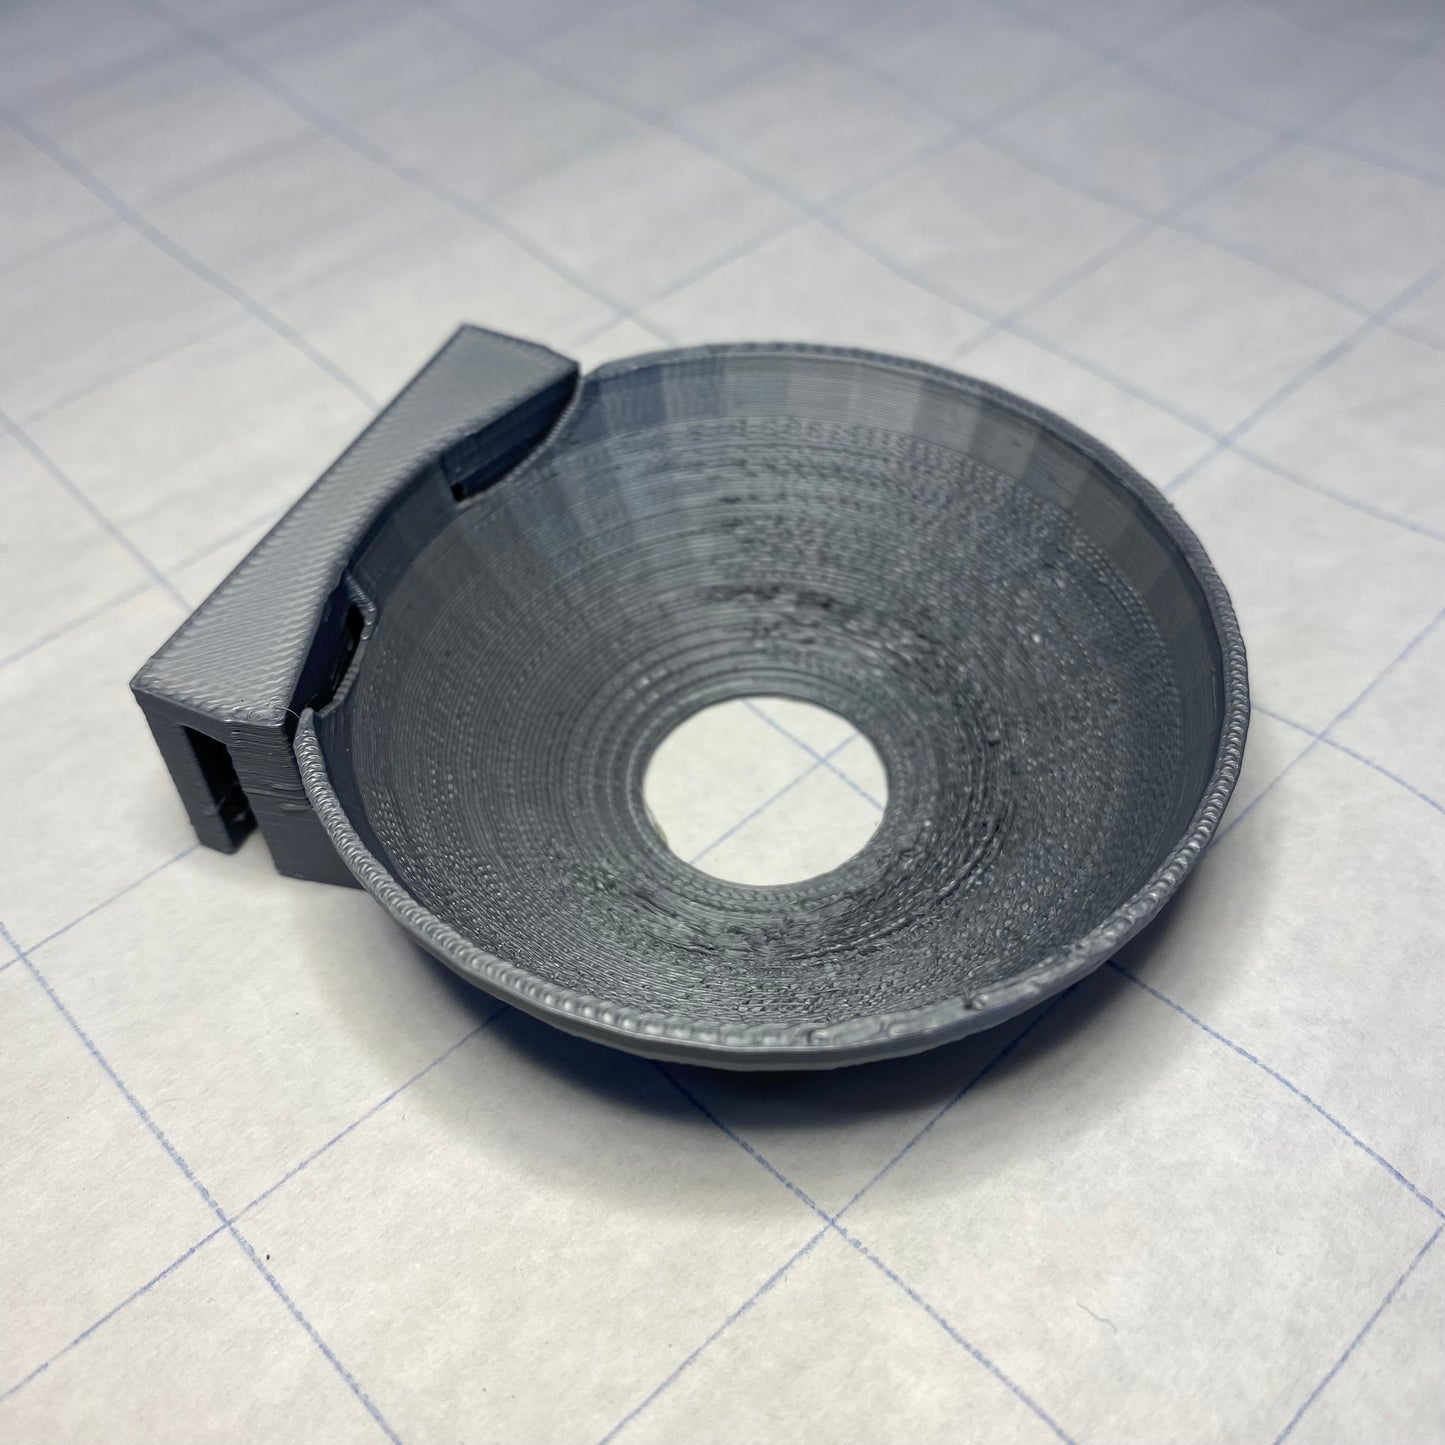 A 3D printable bowl that hangs on the back wall of the PinBox 3000